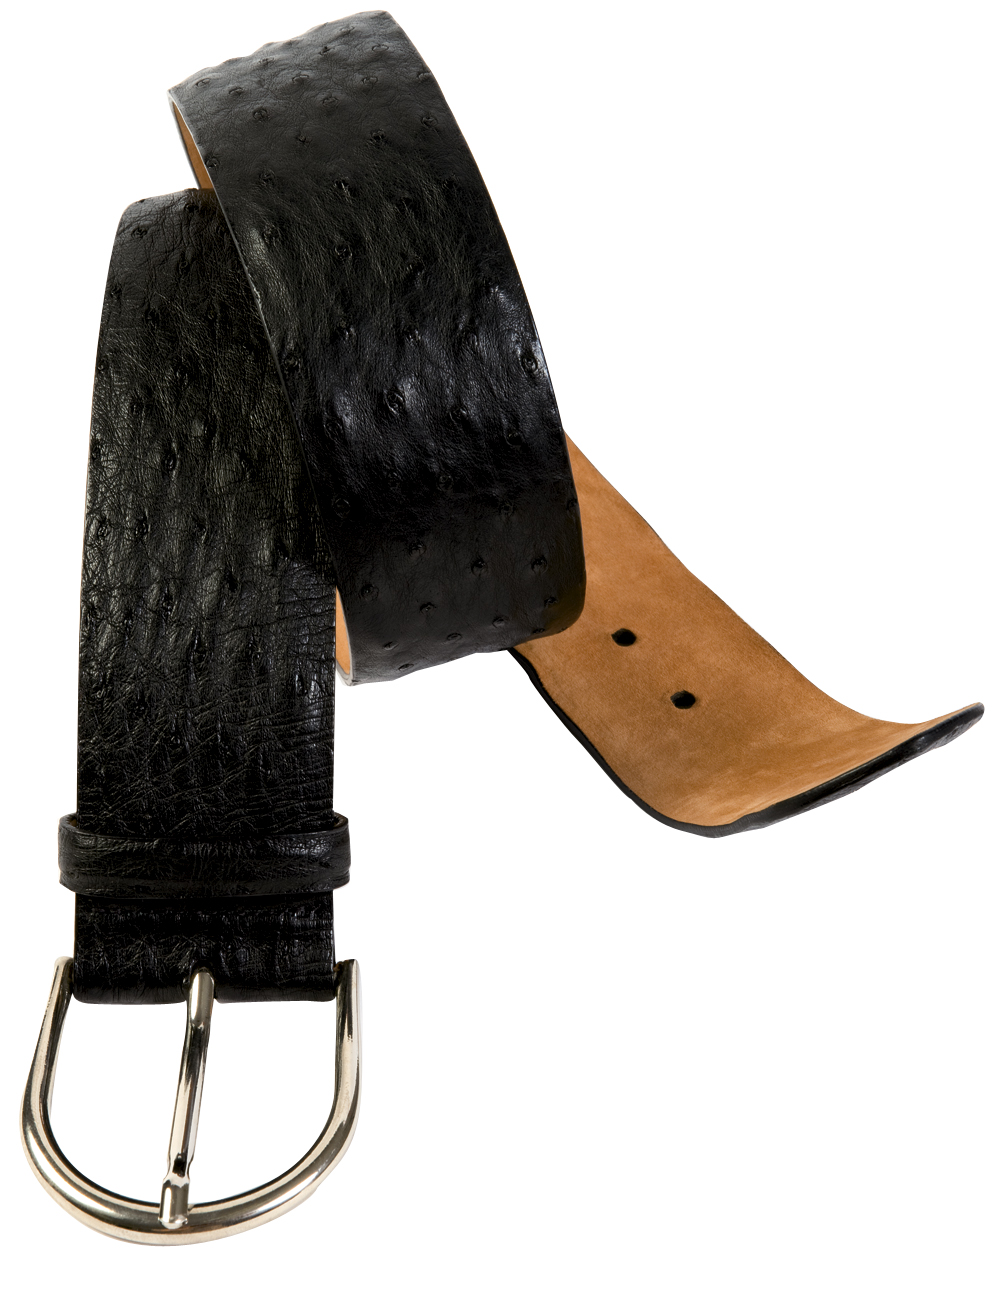 W. Kleinberg Ostrich belt with a nickel buckle, $365 at Rapport